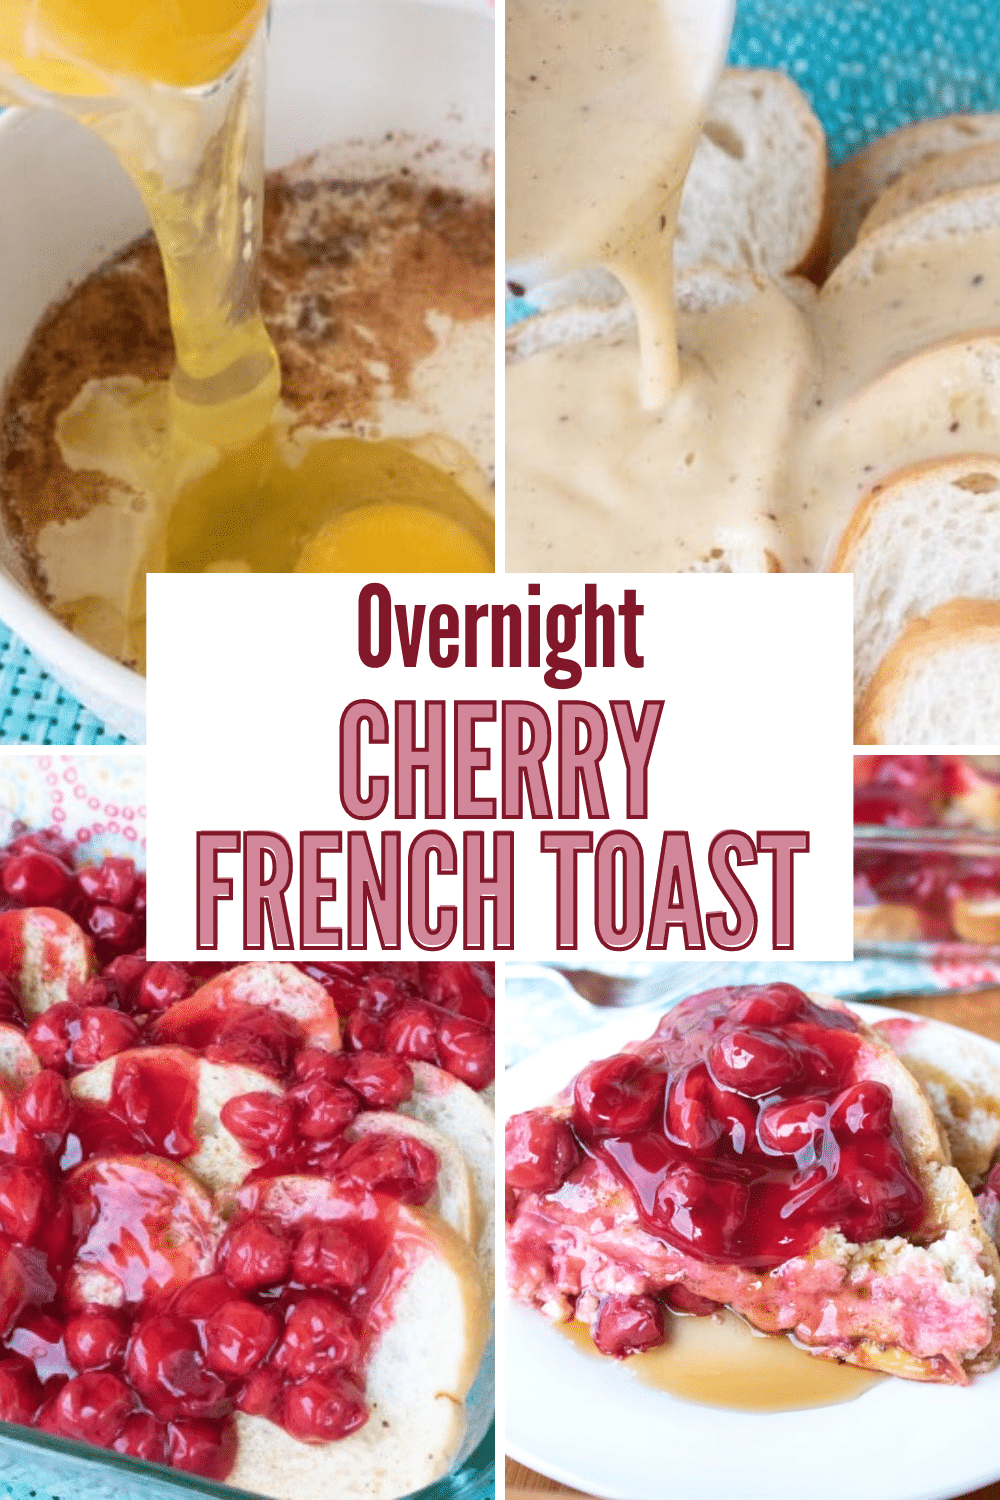 This Overnight Cherry Baked French Toast Bake is such a delicious and easy breakfast casserole! #makeahead #breakfast #casserole via @wondermomwannab